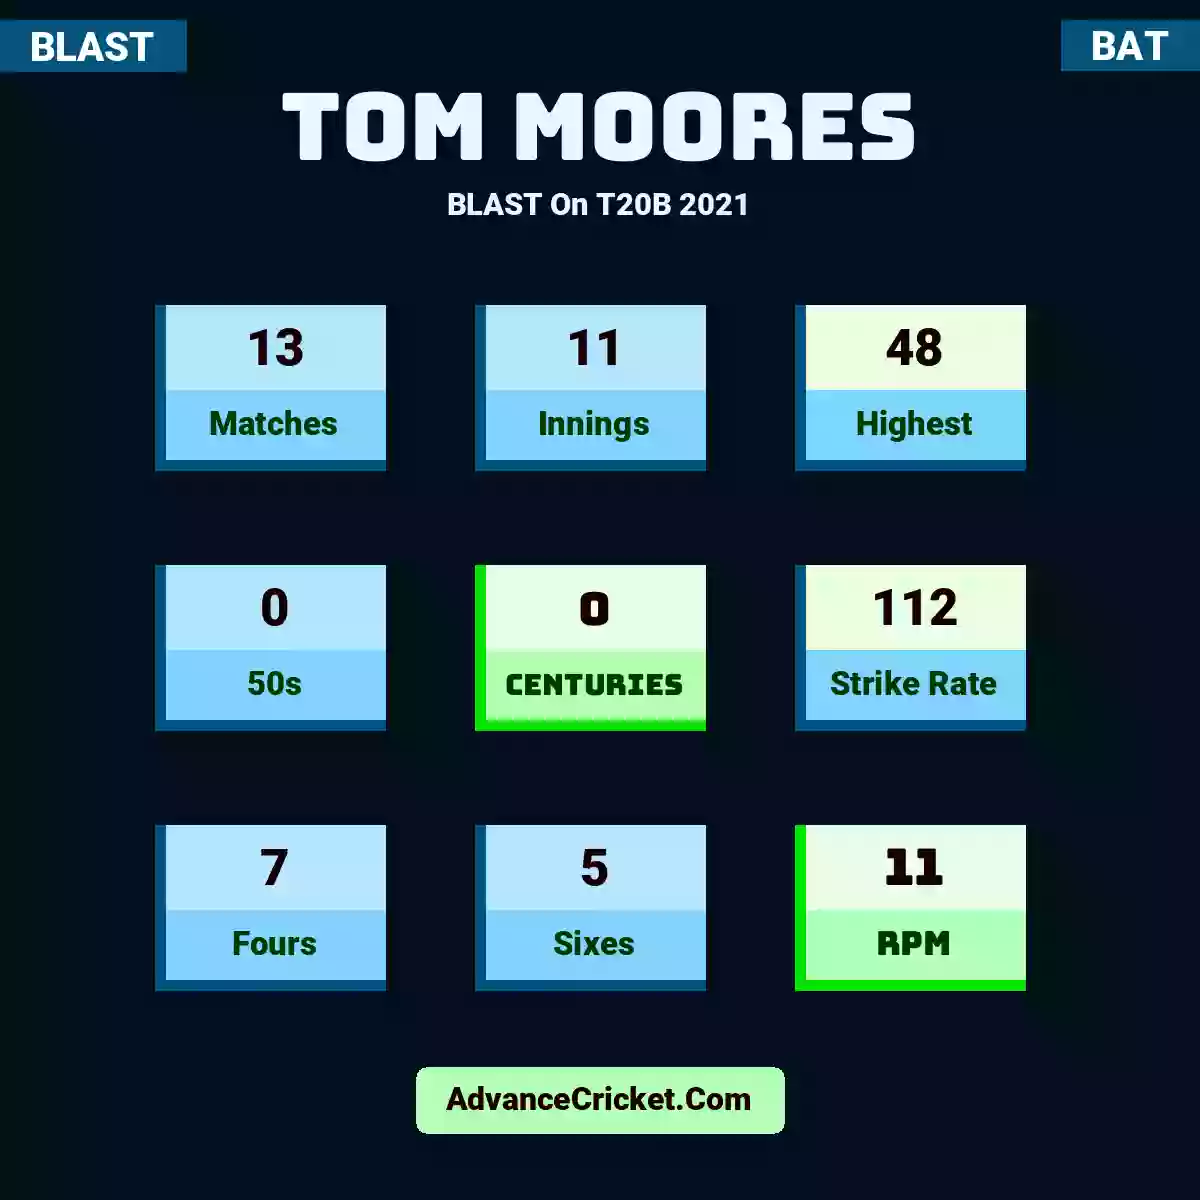 Tom Moores BLAST  On T20B 2021, Tom Moores played 13 matches, scored 48 runs as highest, 0 half-centuries, and 0 centuries, with a strike rate of 112. T.Moores hit 7 fours and 5 sixes, with an RPM of 11.